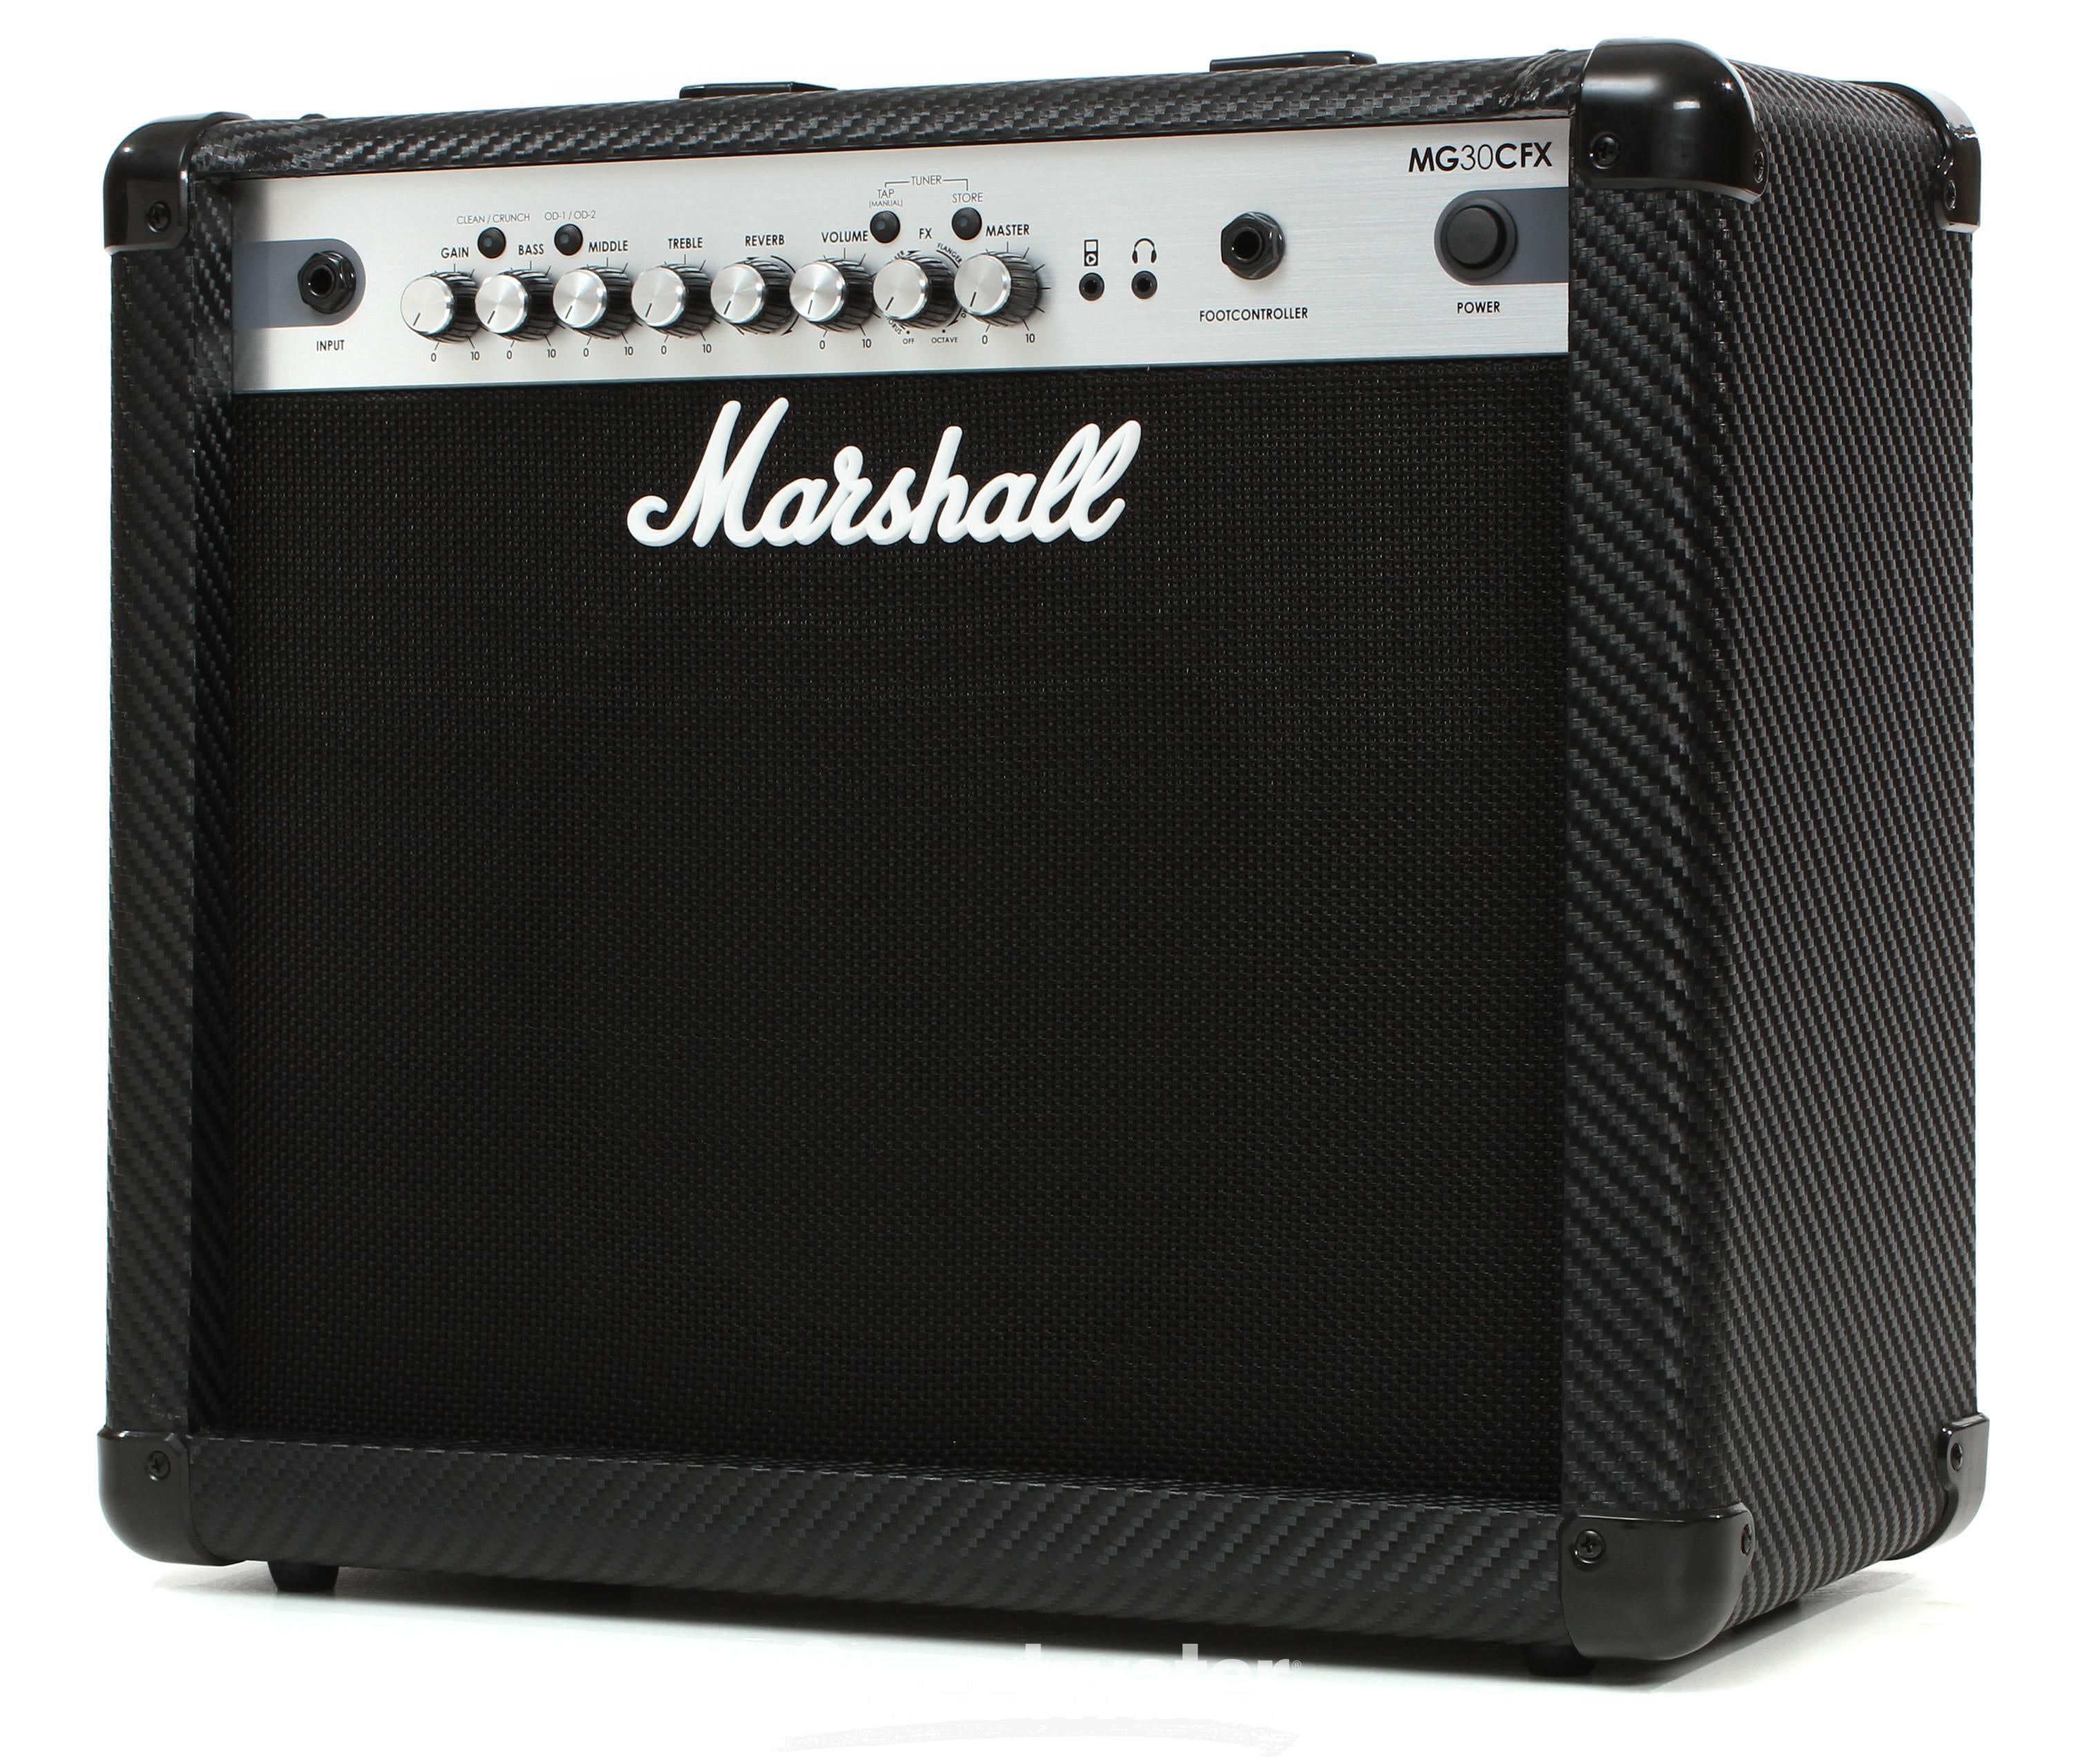 Marshall MG30CFX 30-watt 1x10 Combo Amp with Effects Reviews | Sweetwater